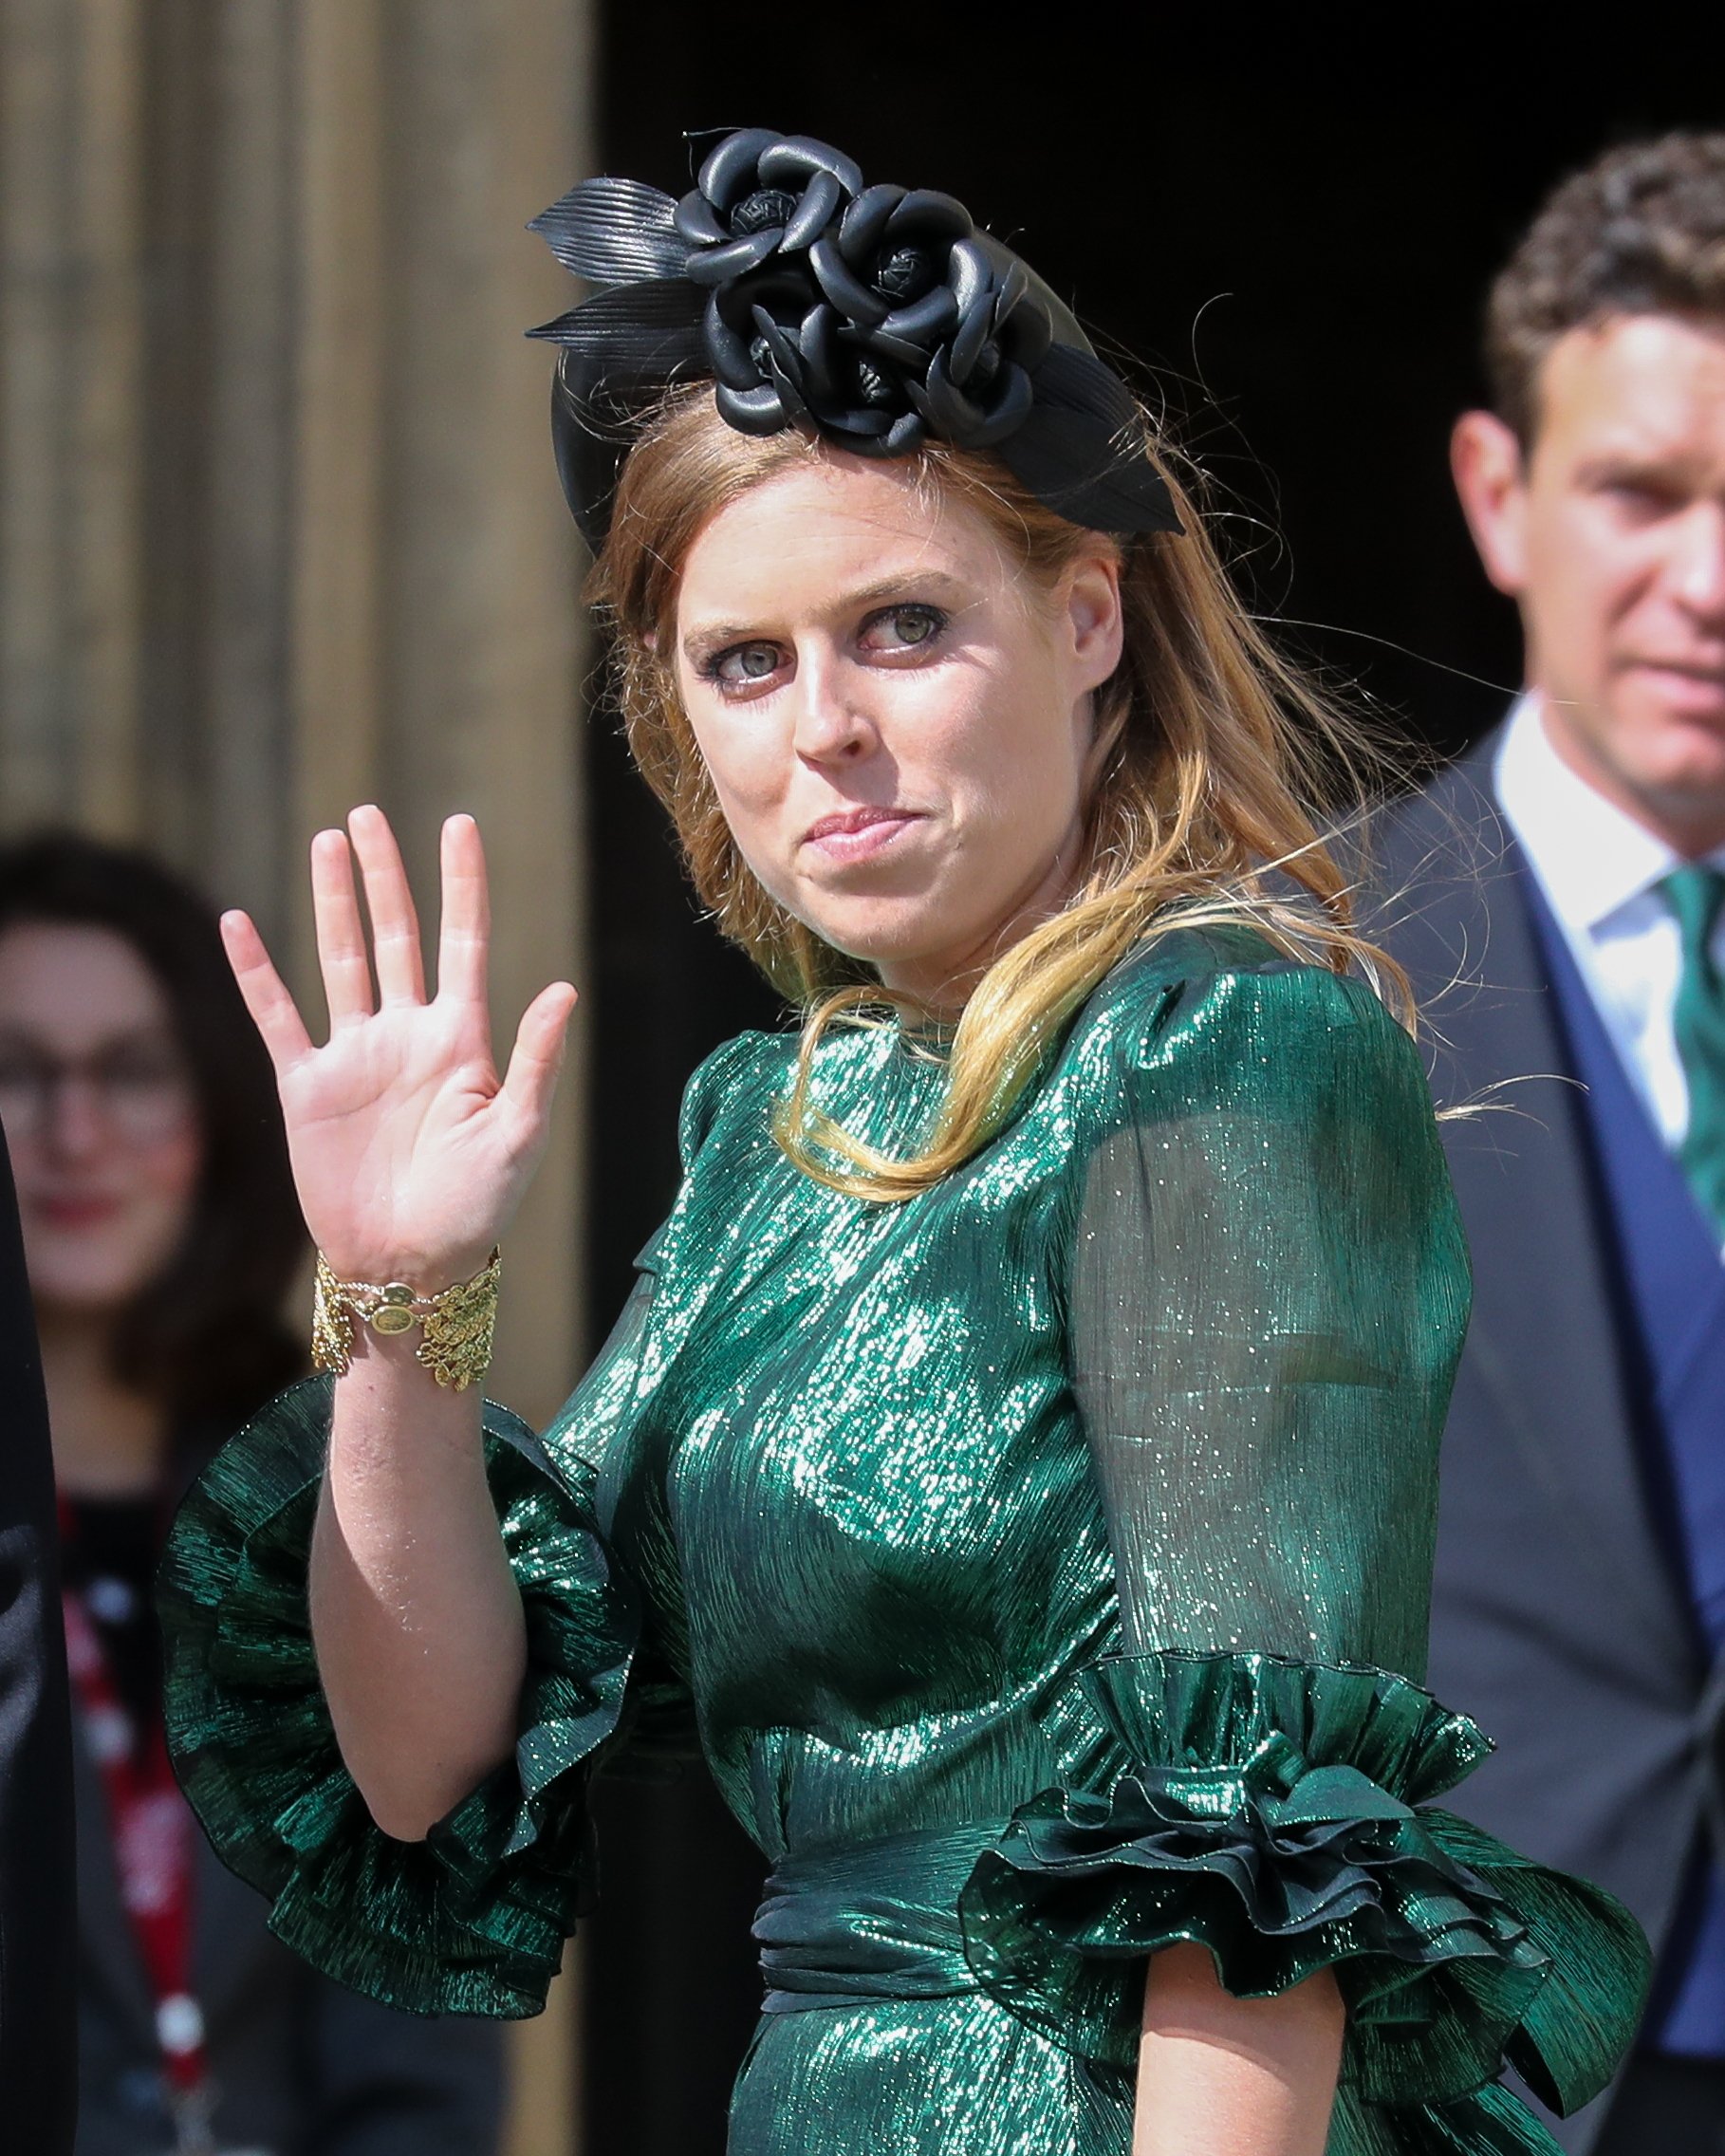 Princess Beatrice, who was very emotional at Prince Philip's memorial service, is seen waving to royal fans at the wedding of Ellie Goulding and Caspar Jopling